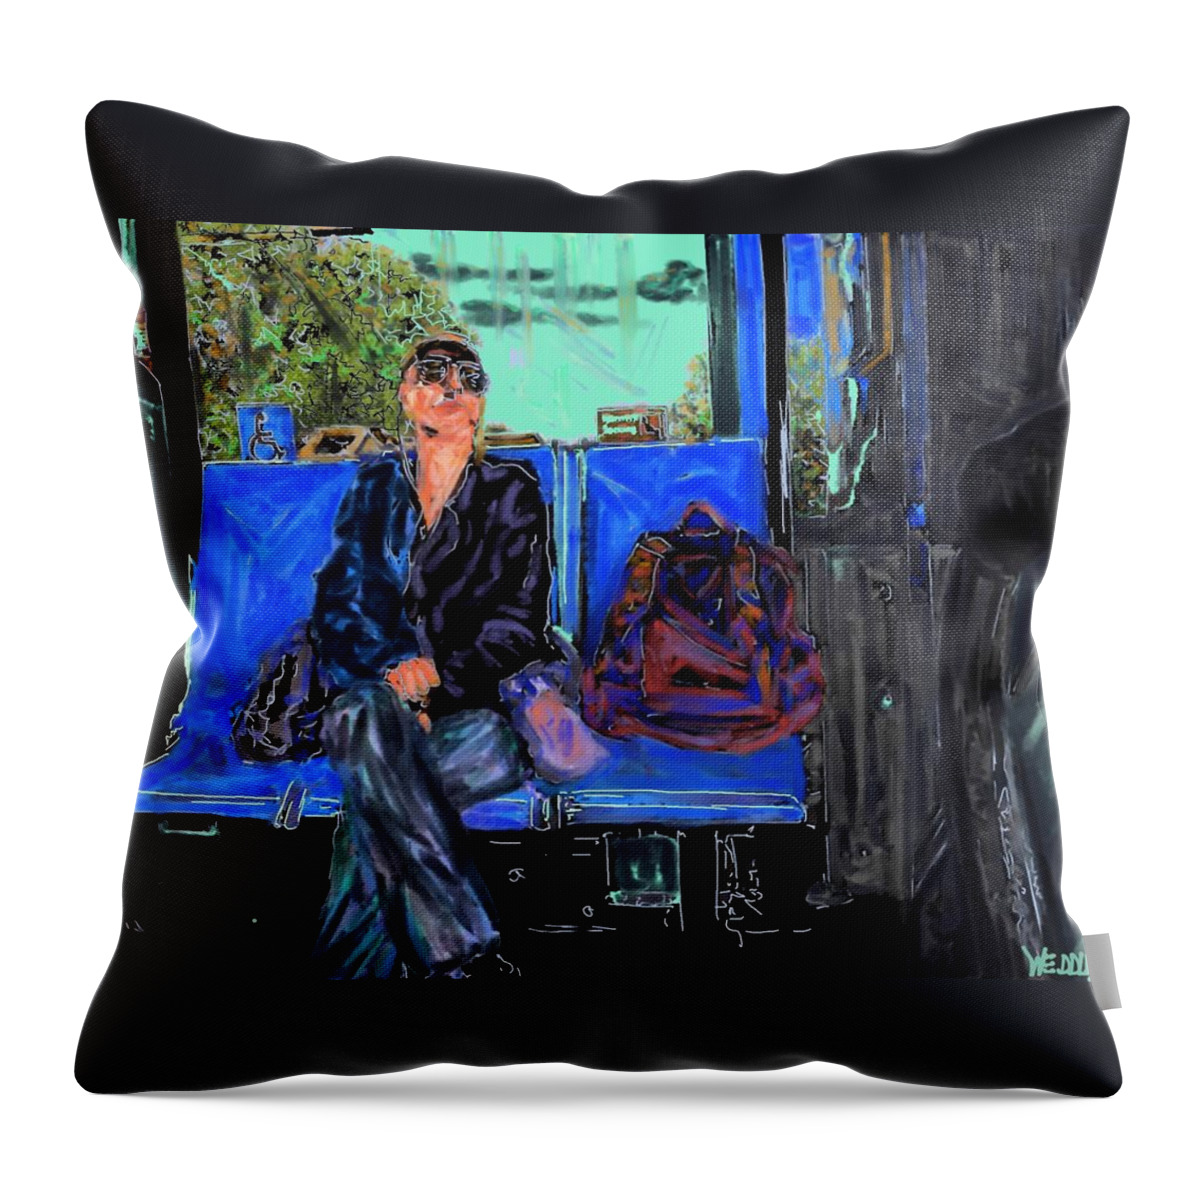 Evening Throw Pillow featuring the digital art Evening Bus Ride 2 by Angela Weddle